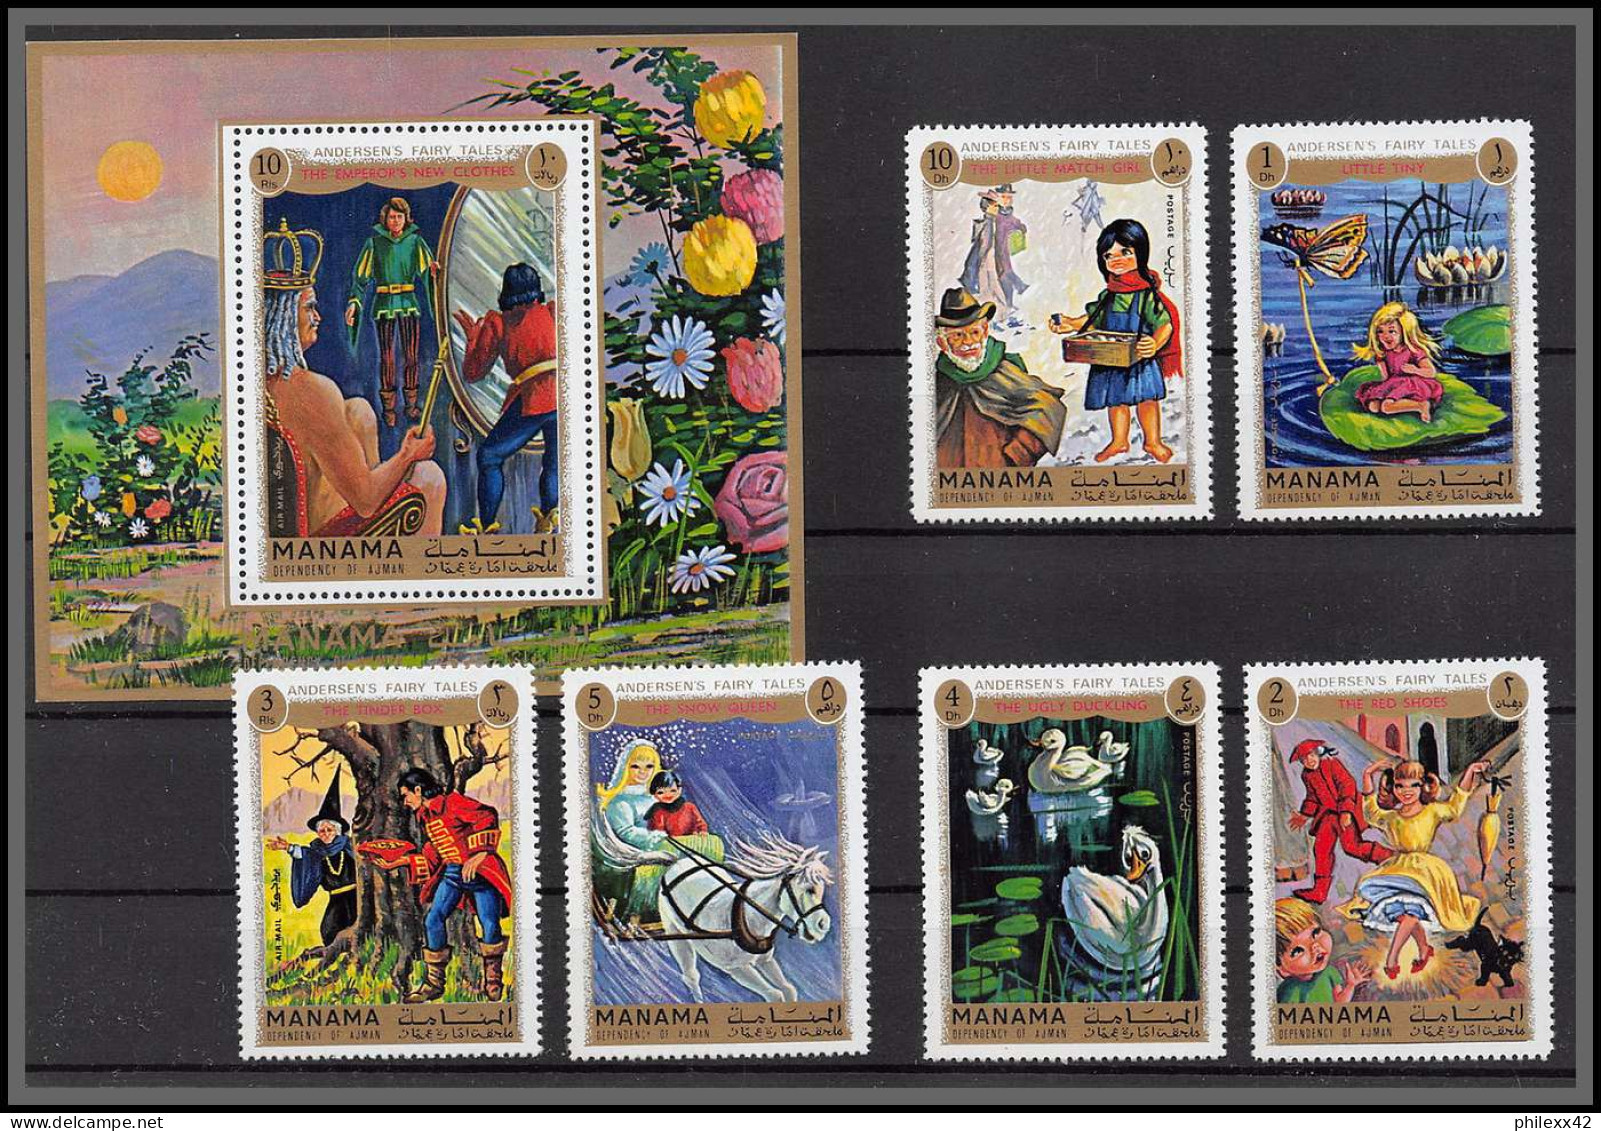 Manama - 3174h/ N° 893/898 A + Bloc 173 A Contes Fairy Tales Andersen ** MNH - Fairy Tales, Popular Stories & Legends